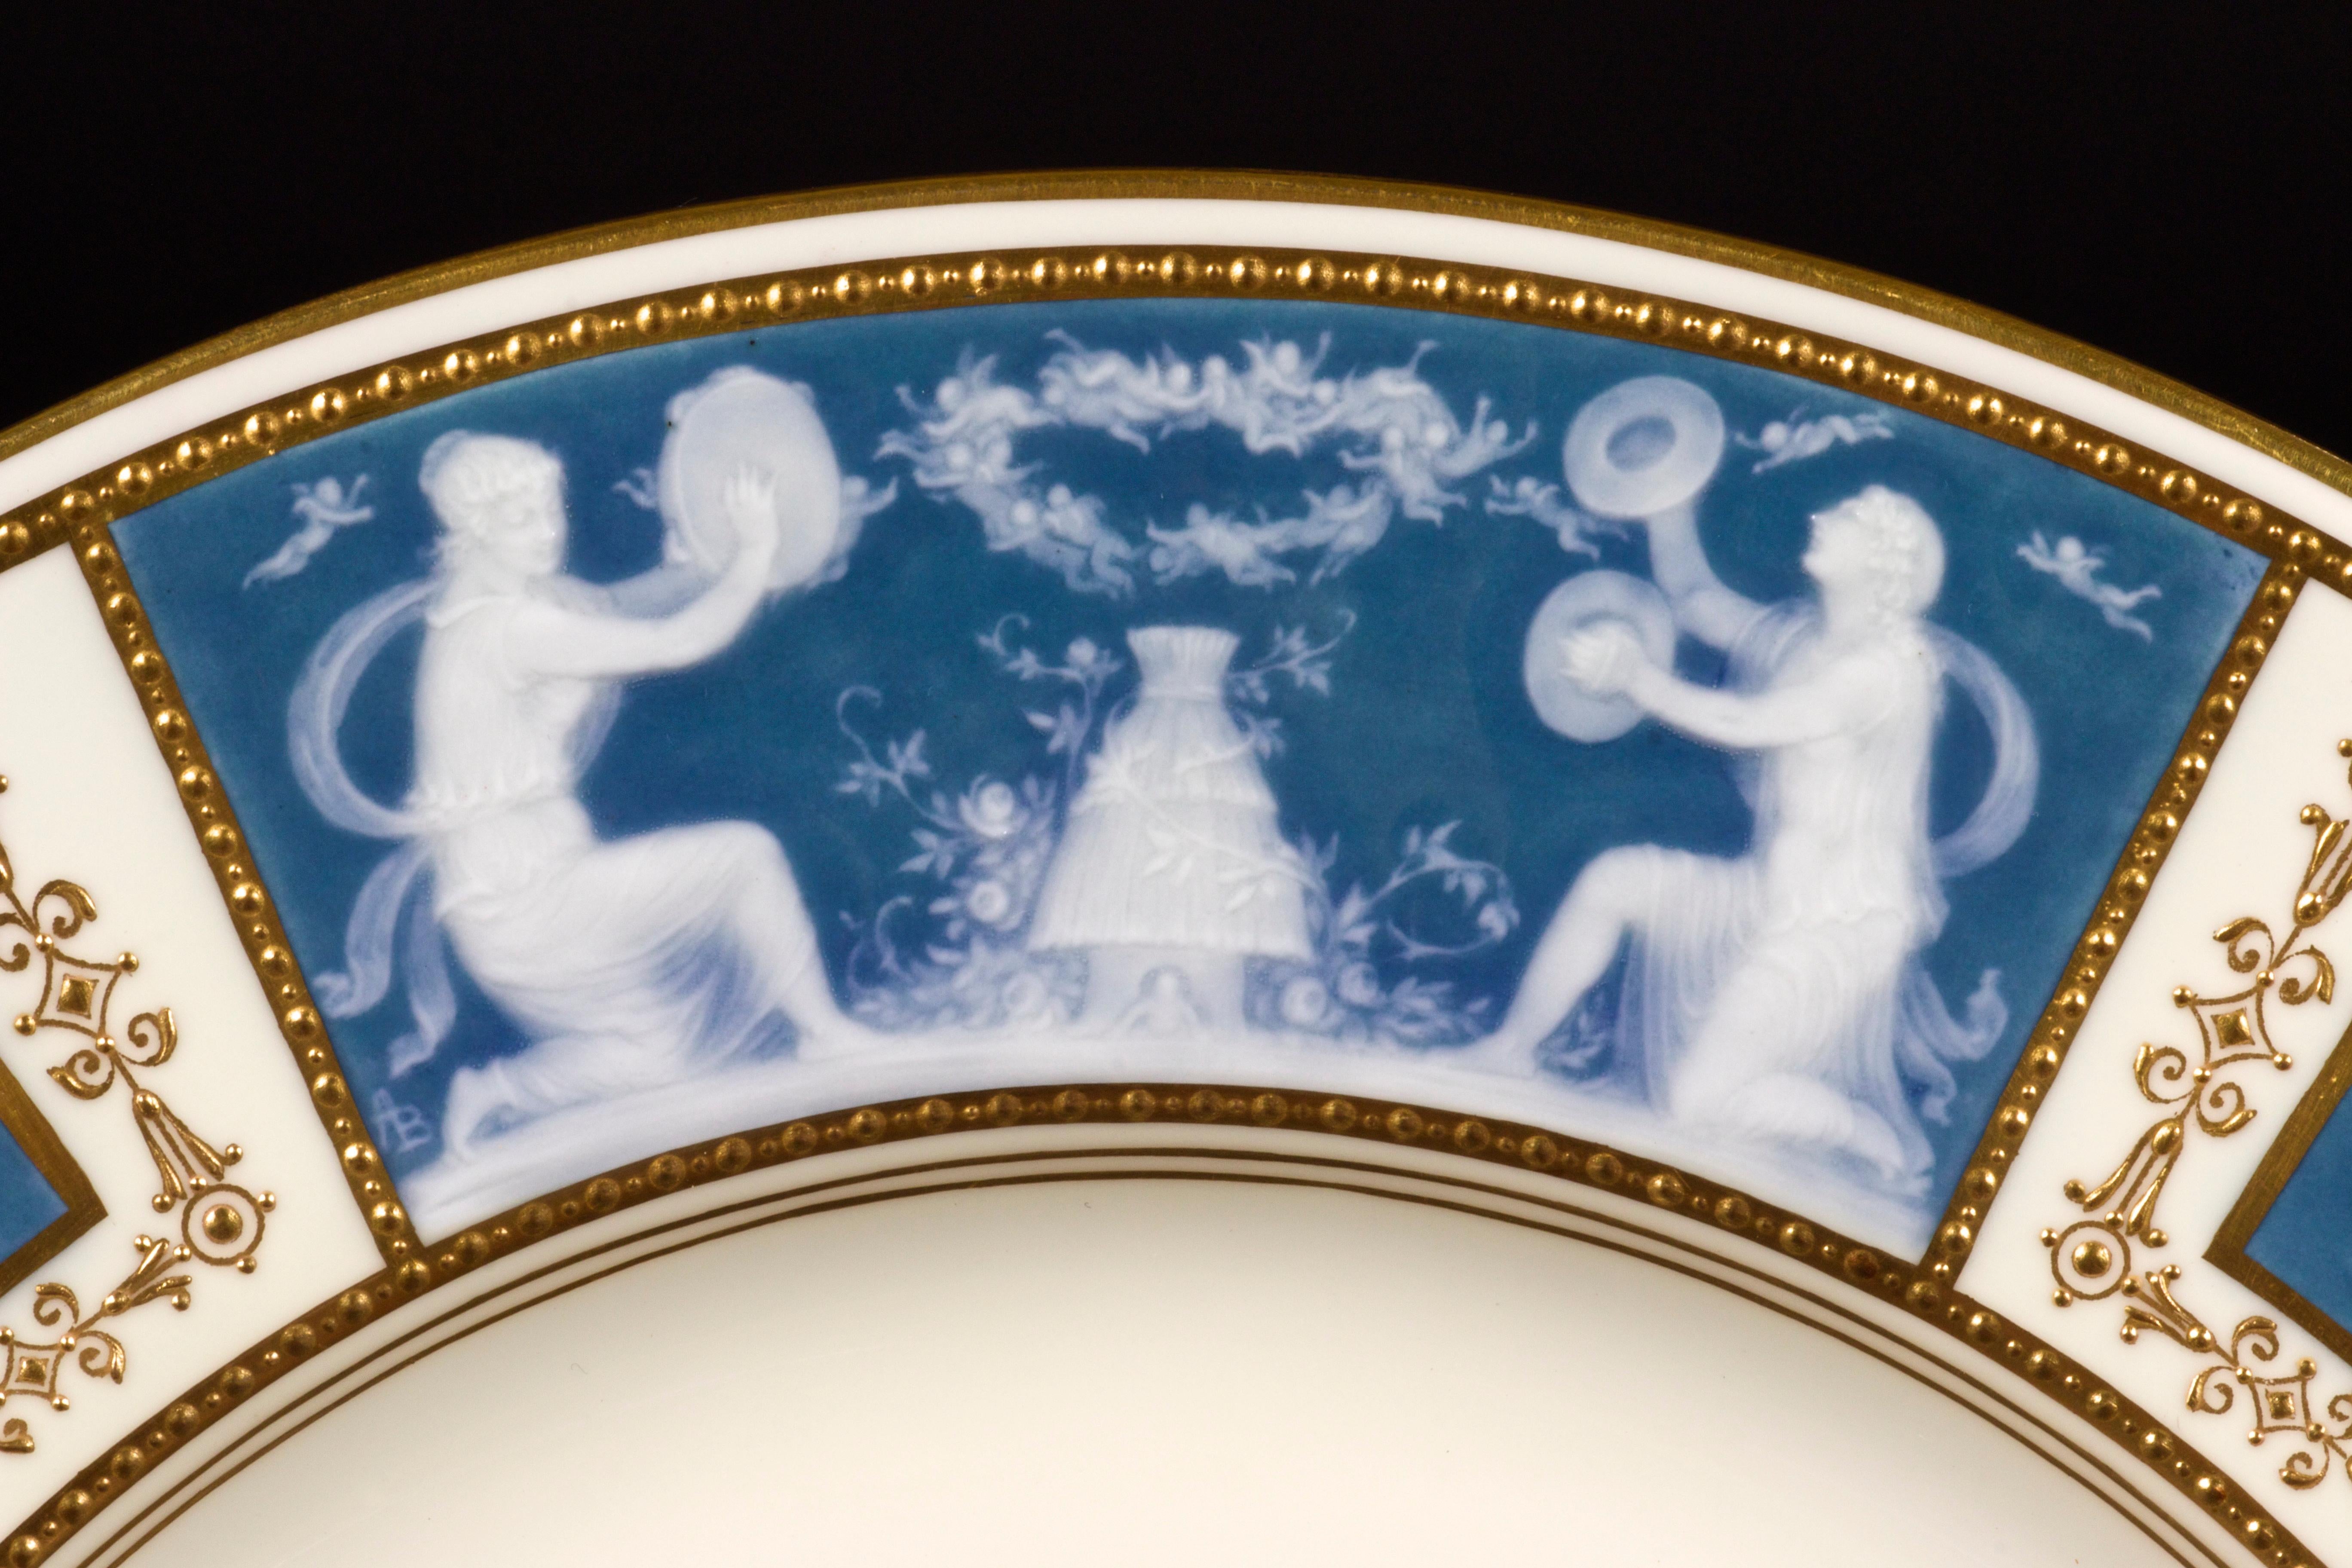 Hand-Crafted 8 Minton Pate-sur-pate Blue Plates for Tiffany, by Artist Albion Birks For Sale